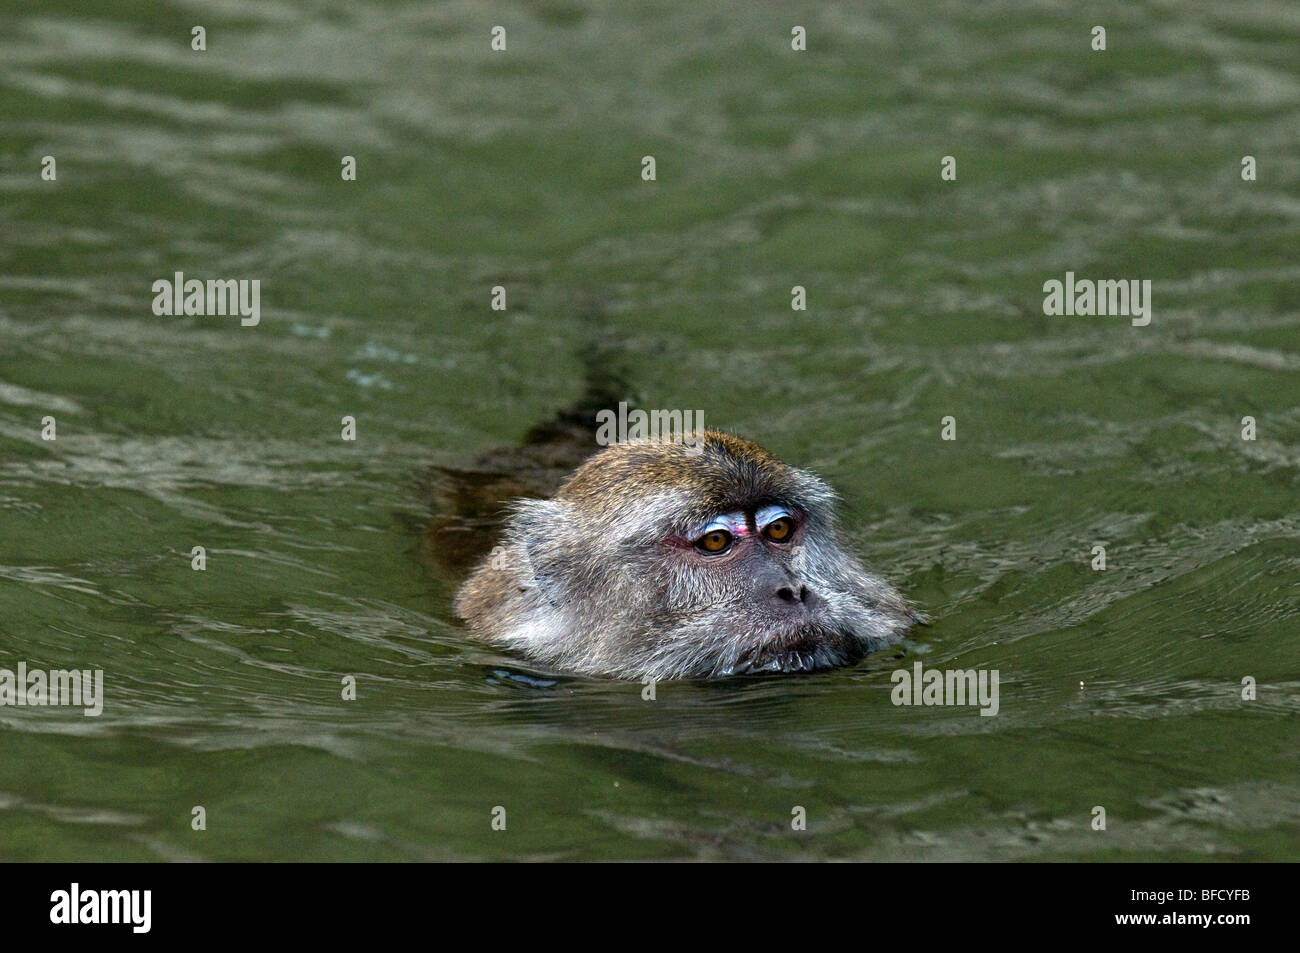 A Long-tailed or Crab-eating Macaque monkey Macaca fascicularis swimming. Stock Photo